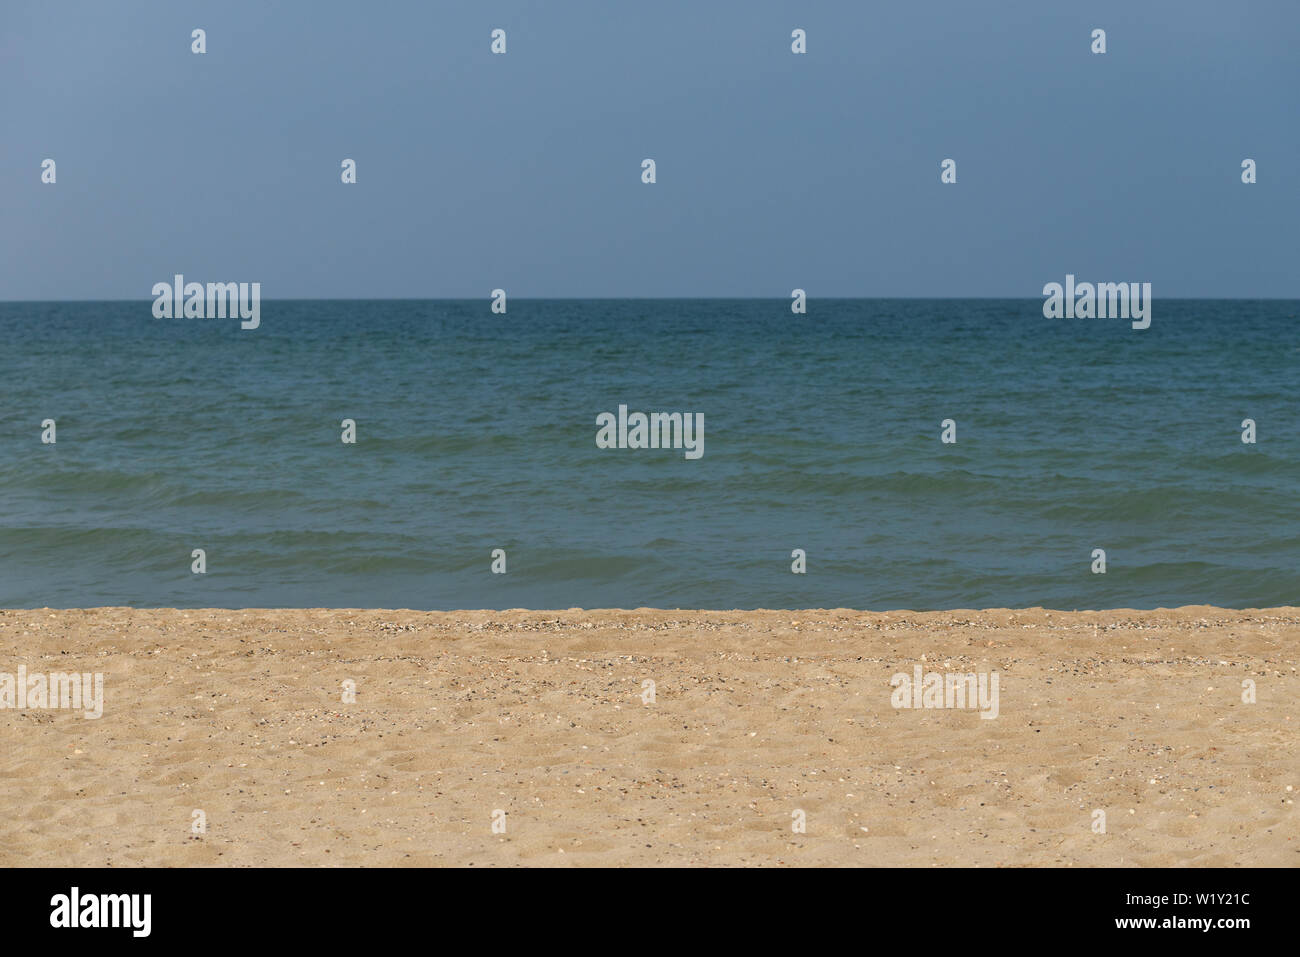 Abstract seascape. Summer background for design on the theme of the sea resort. Sky, water and sandy beach Stock Photo